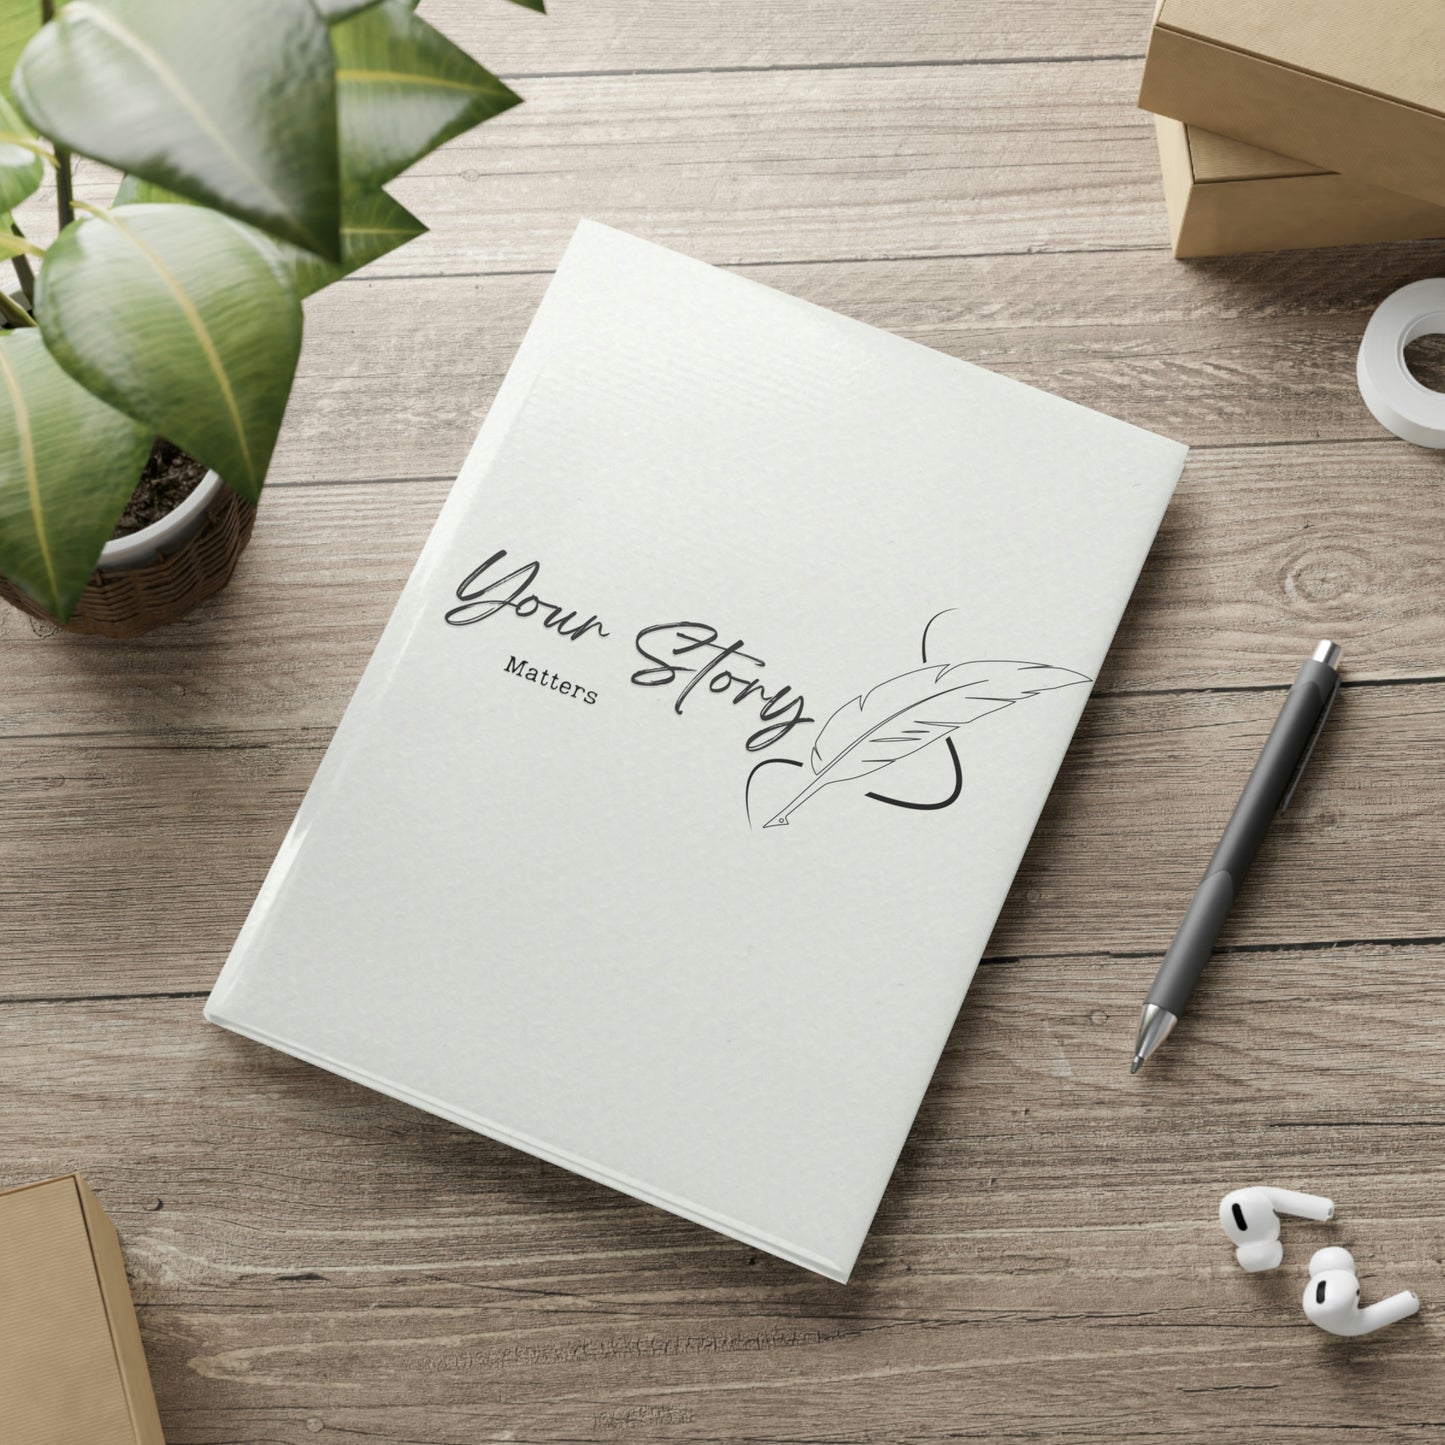 Your Story Matters // Write Out Loud // Hardcover Notebook with Puffy Covers